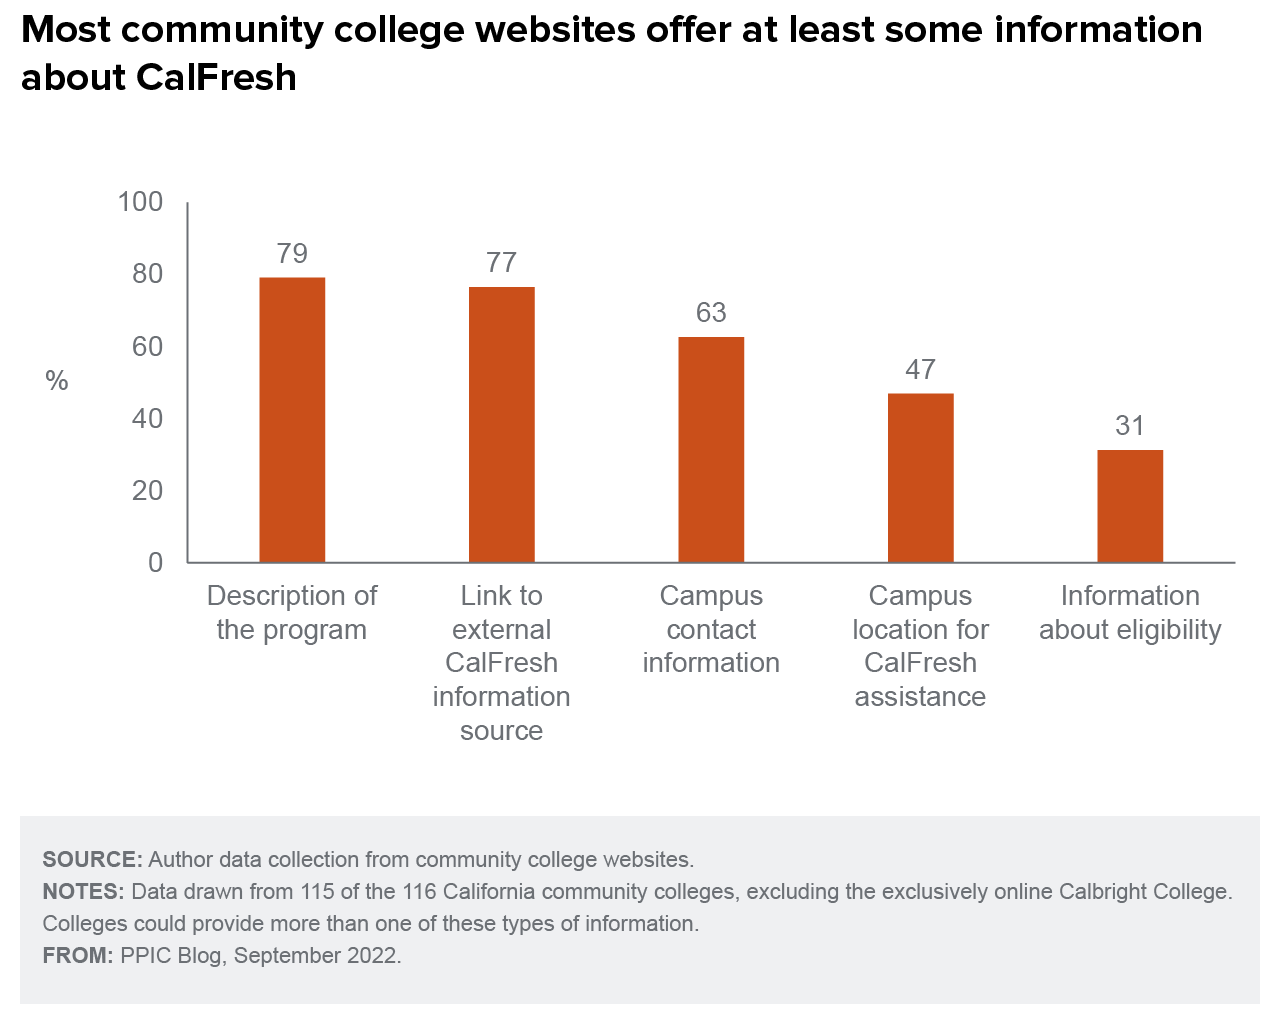 figure - Most community college websites offer at least some information about CalFresh